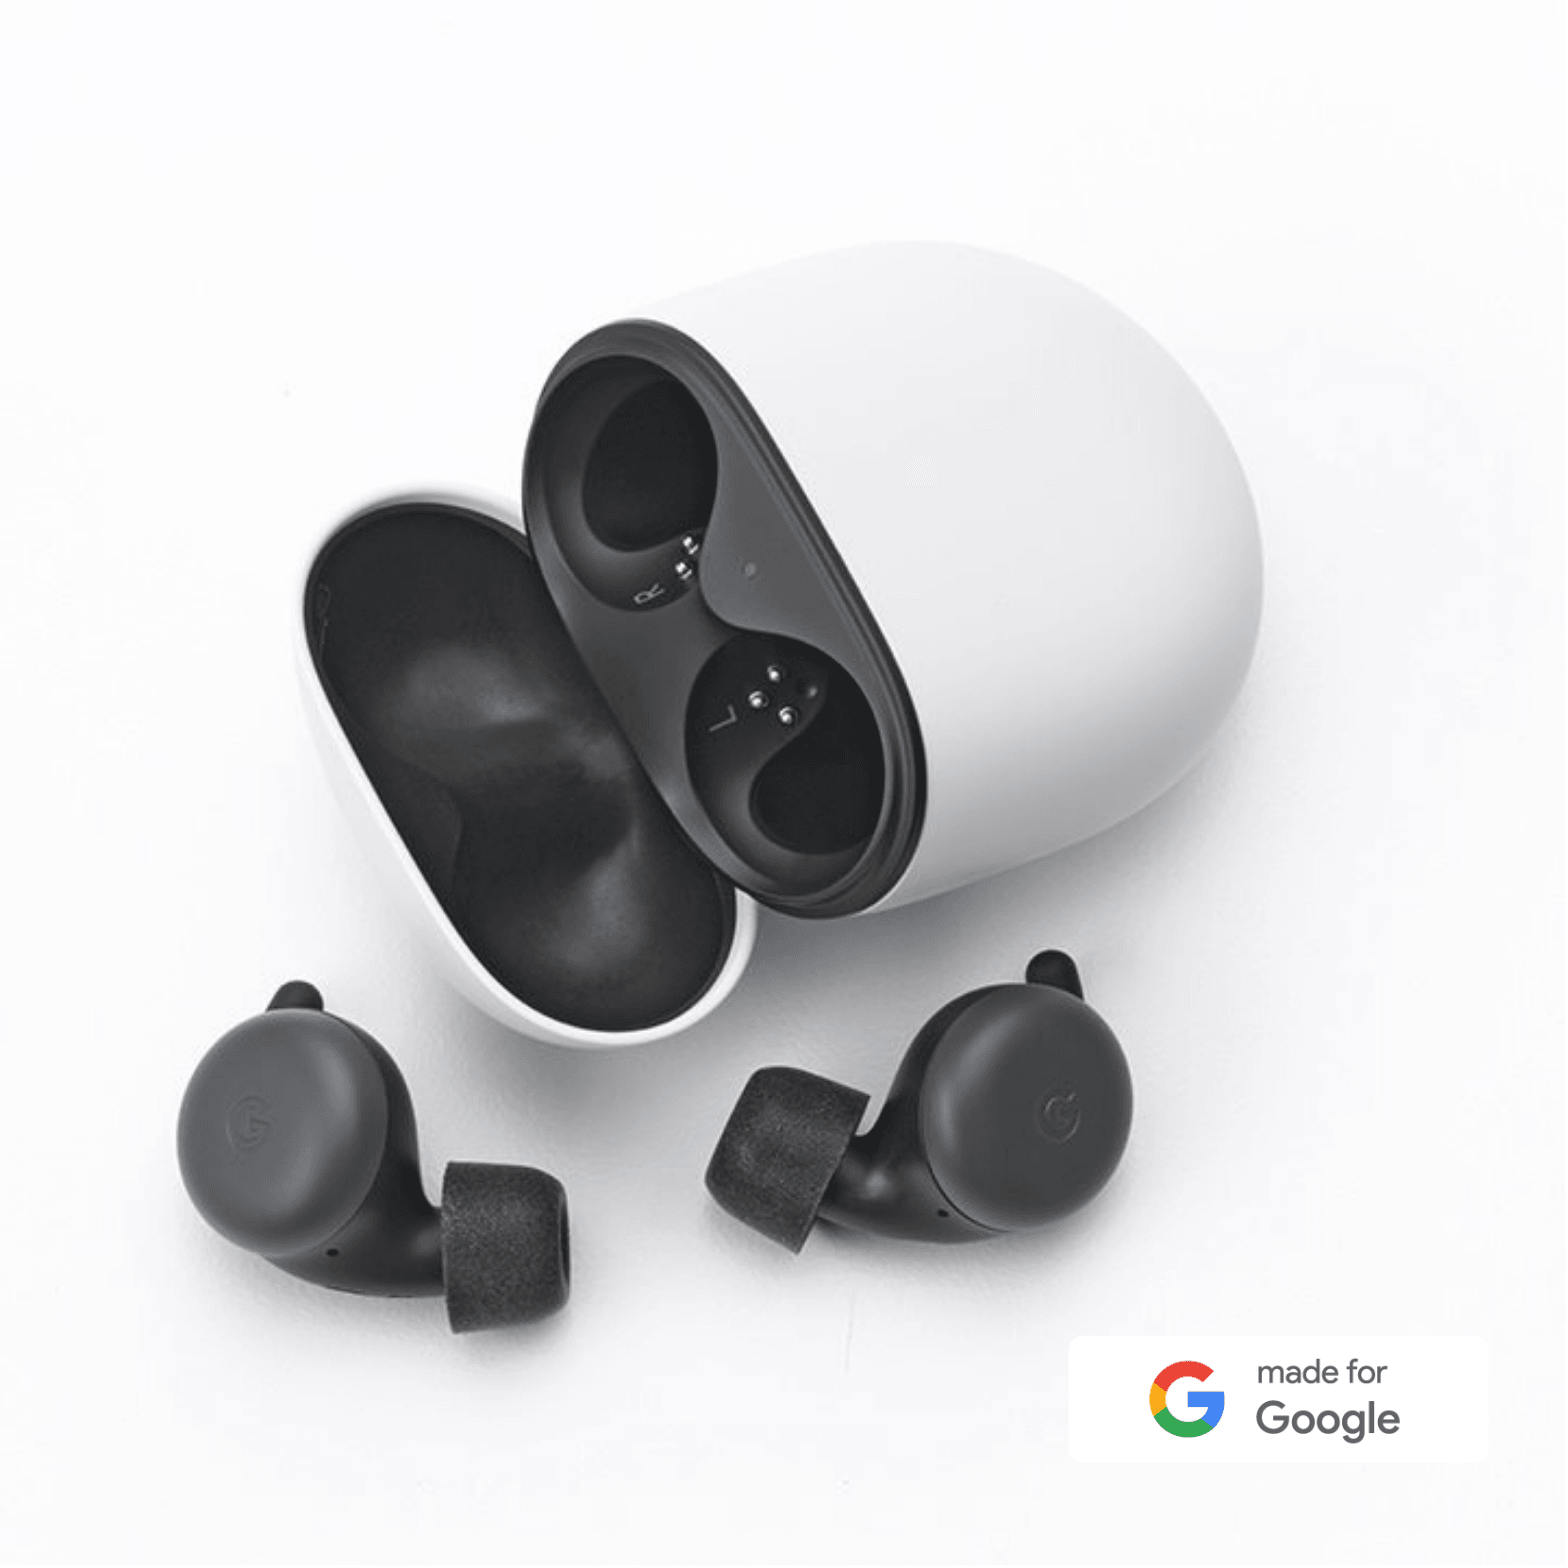 Clear Case for Google Pixel Buds Pro